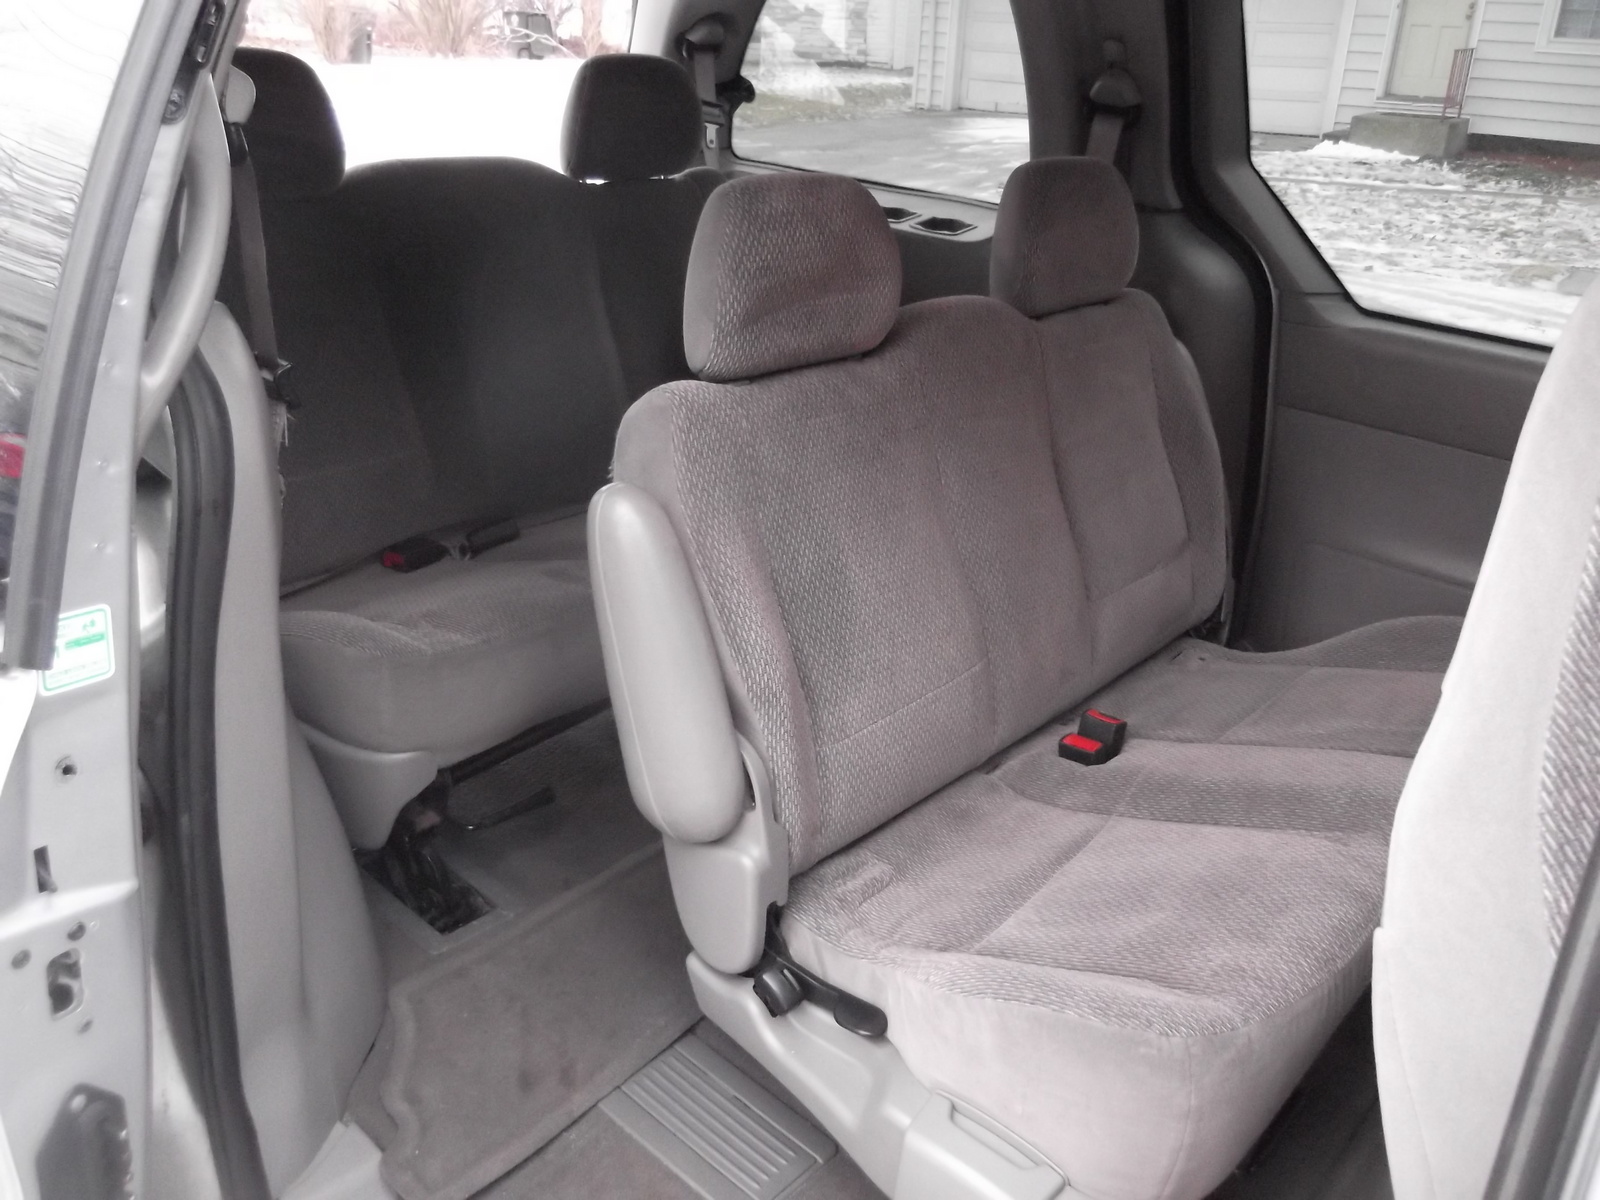 2001 Ford windstar interior pictures #7